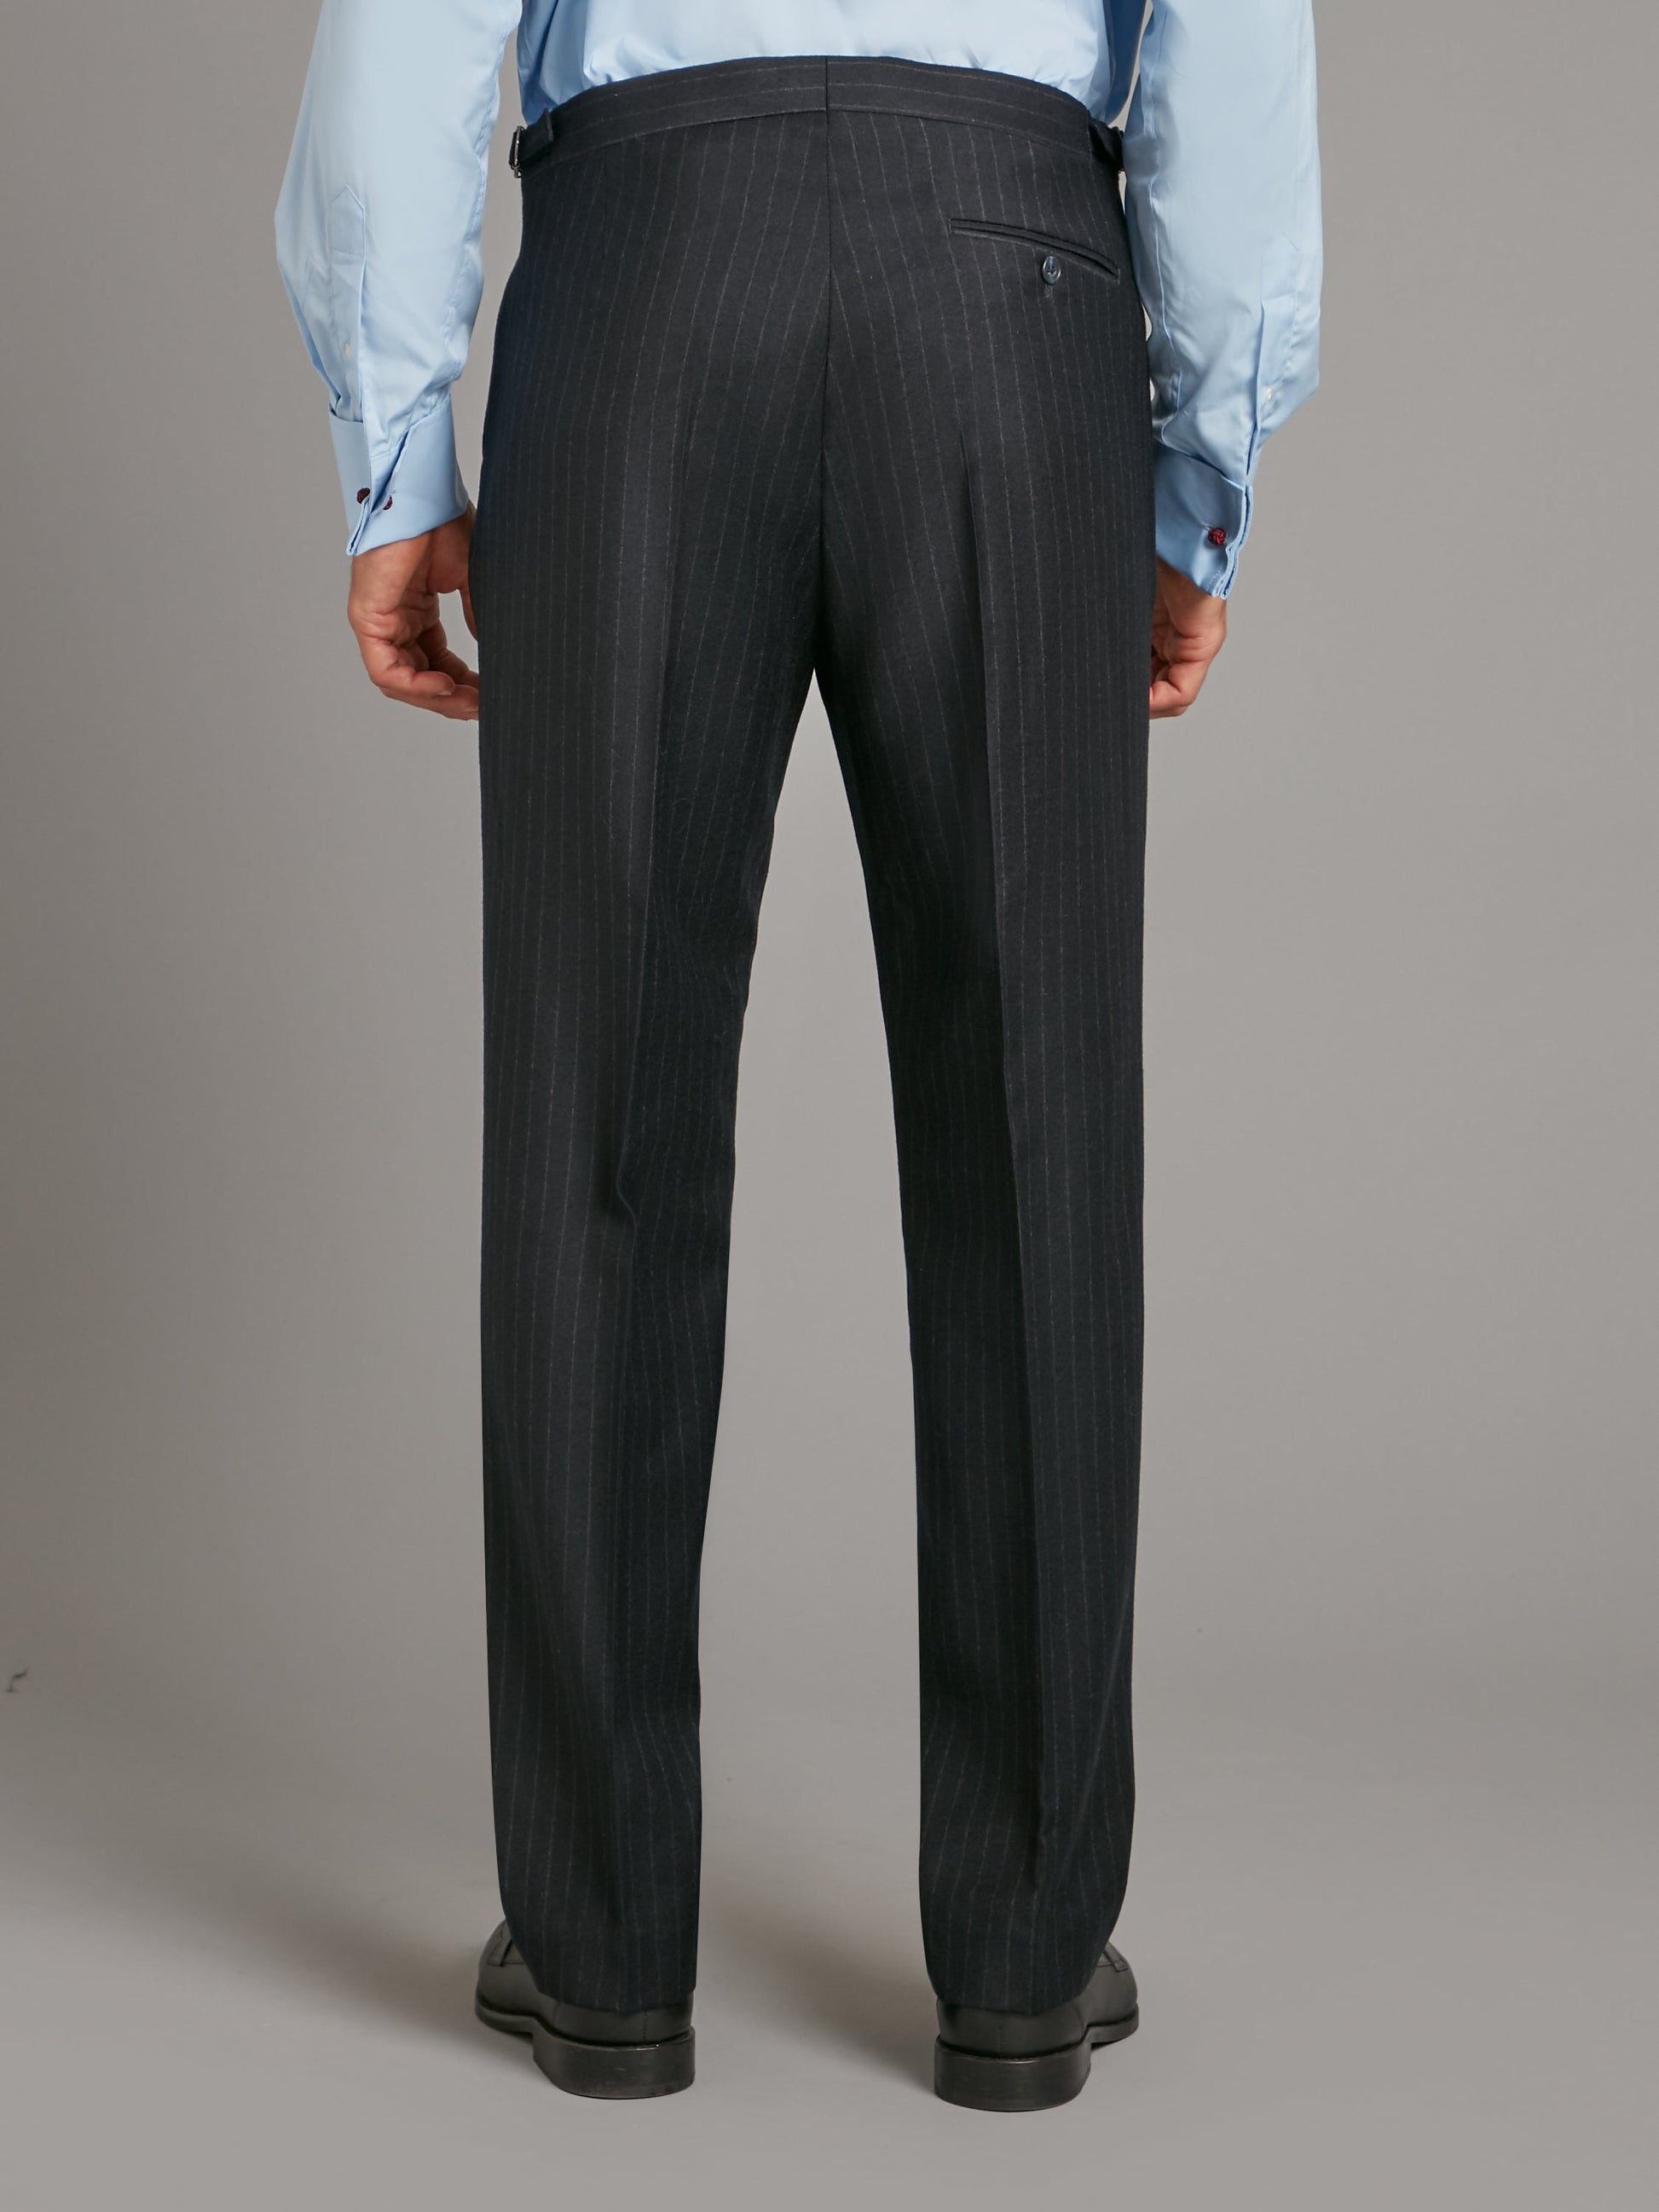 carlyle suit chalk stripe flannel navy 7